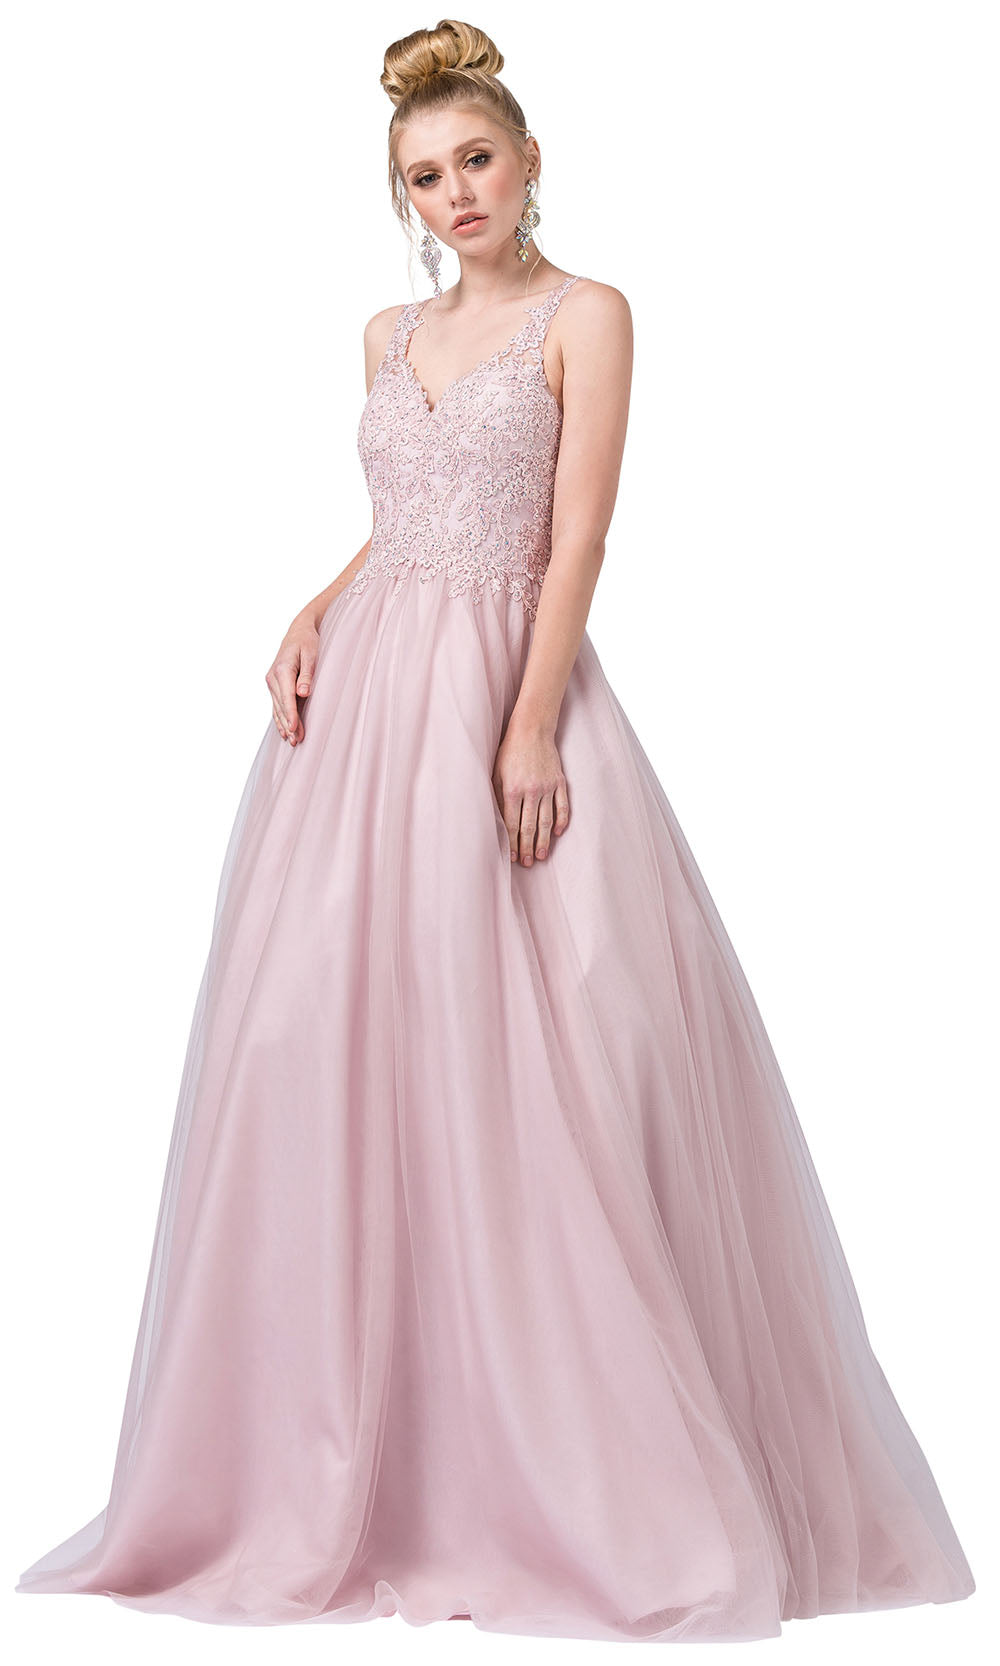 Dancing Queen - 2626 Sleeveless Embroidered Bodice A-Line Dress In Pink